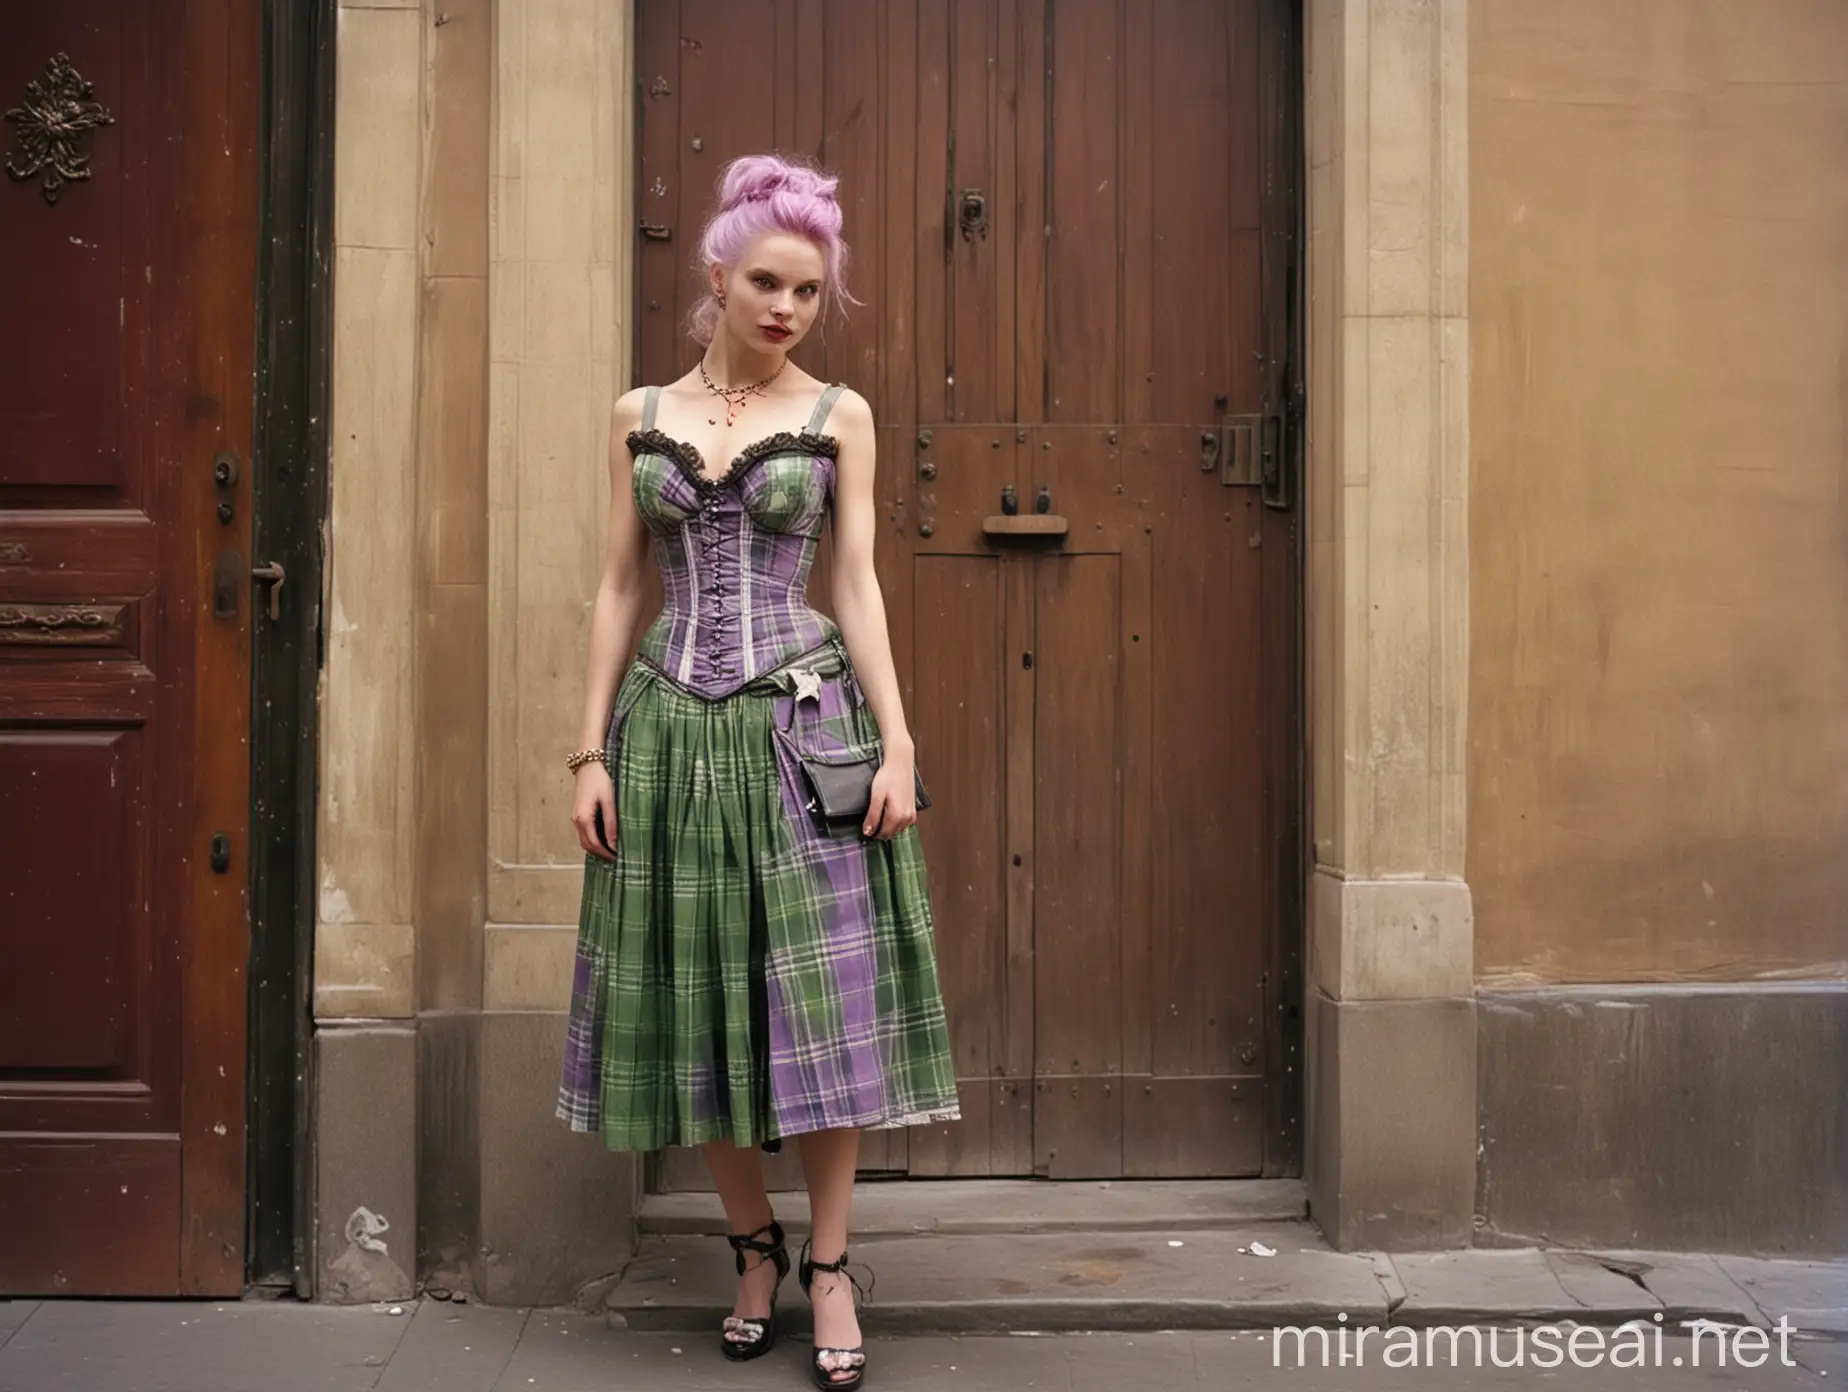 Stylish Woman in Vivienne Westwood Attire Outside Theater in Argentina